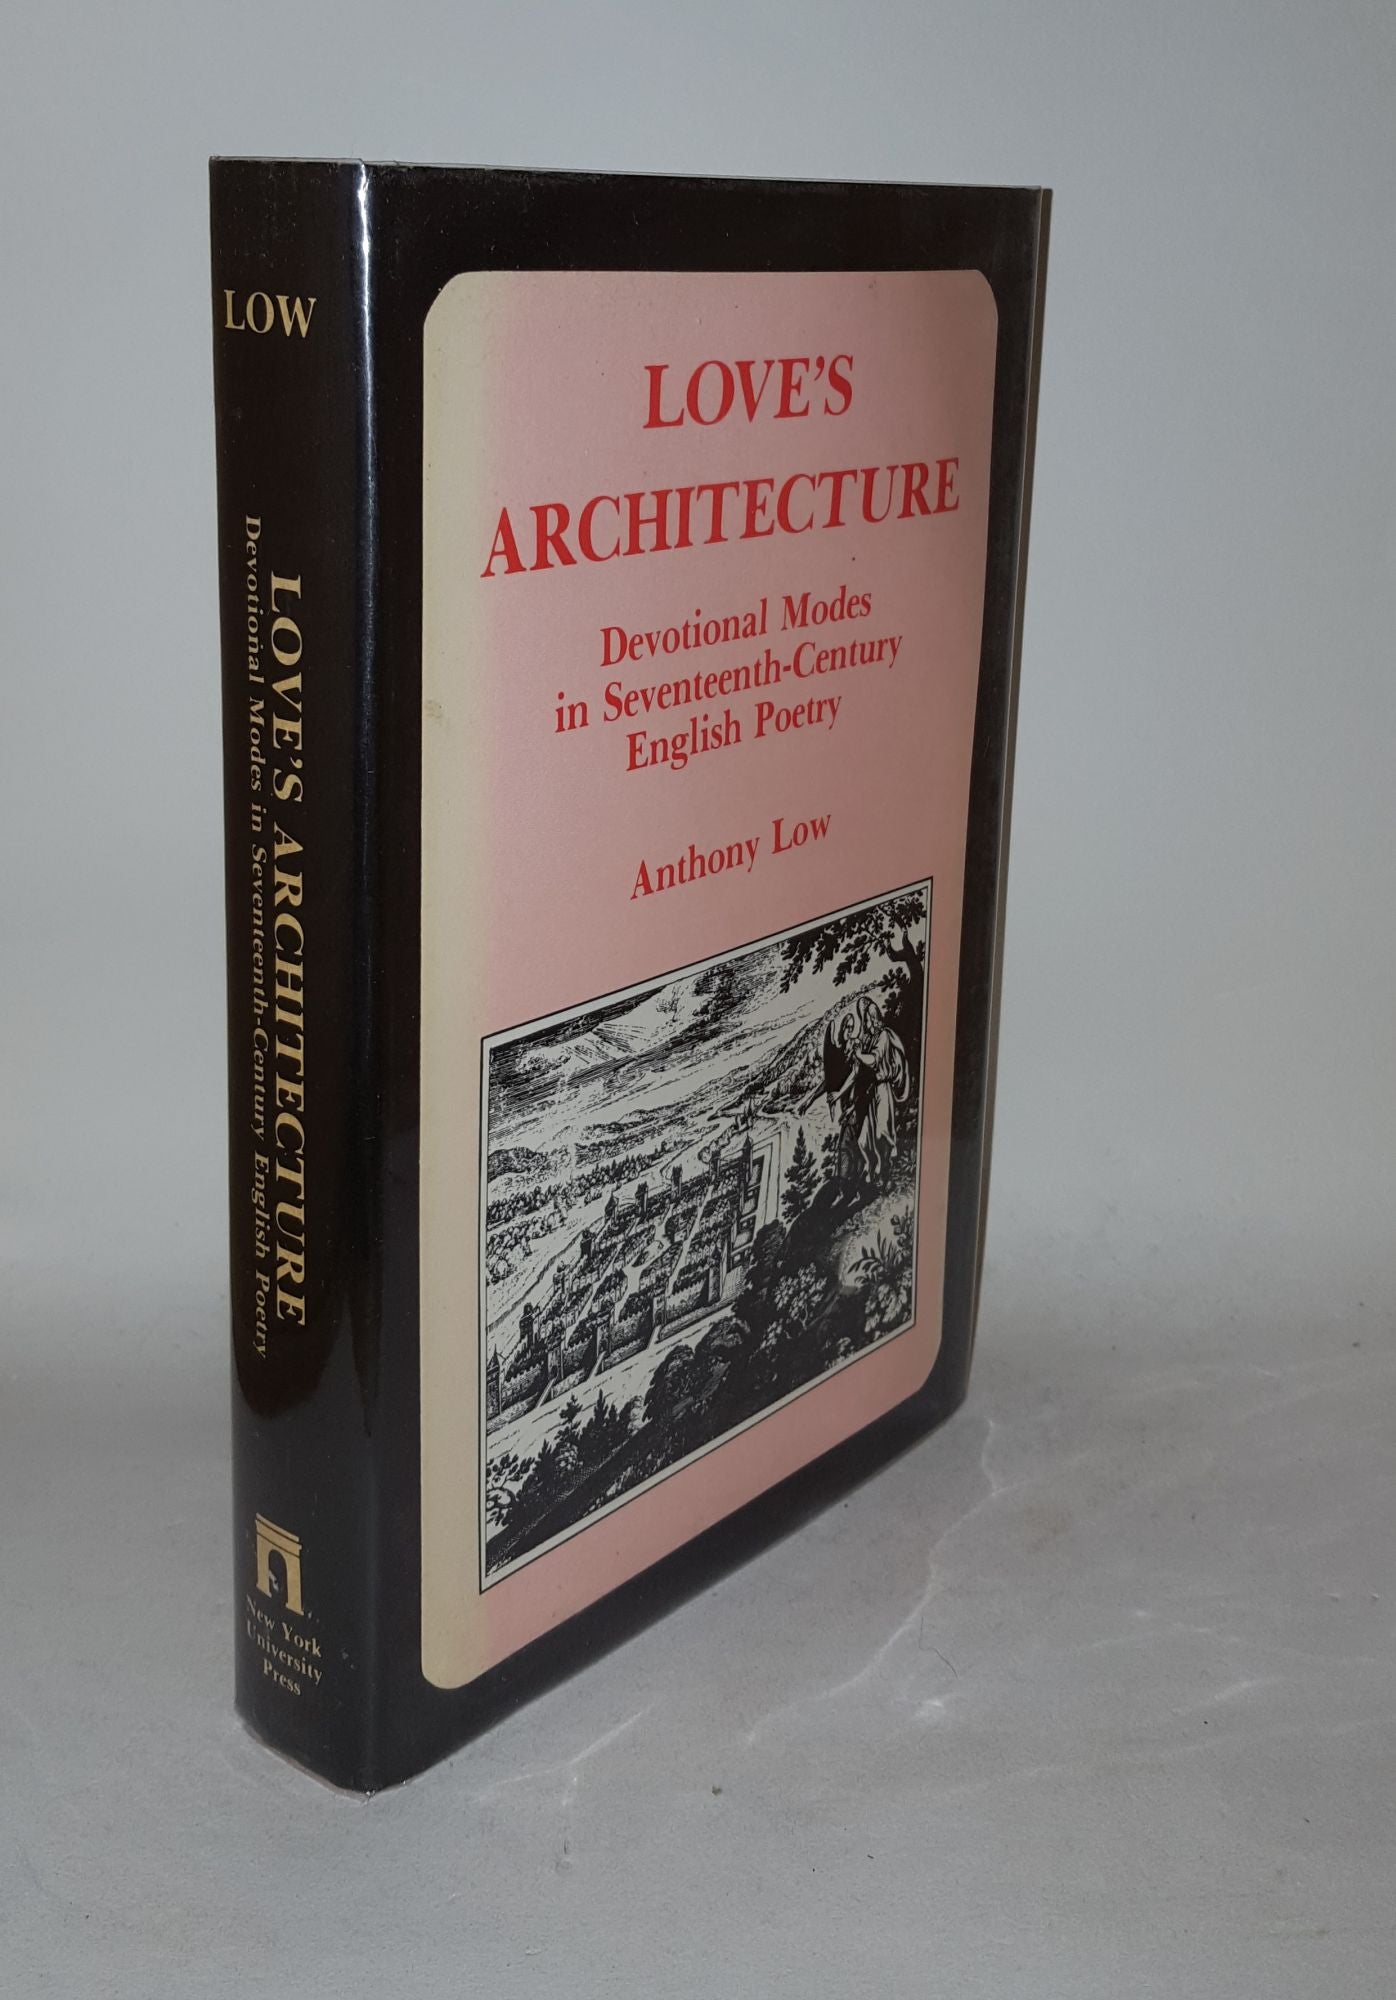 LOW Anthony - Love's Architecture Devotional Modes in Seventeenth-Century English Poetry